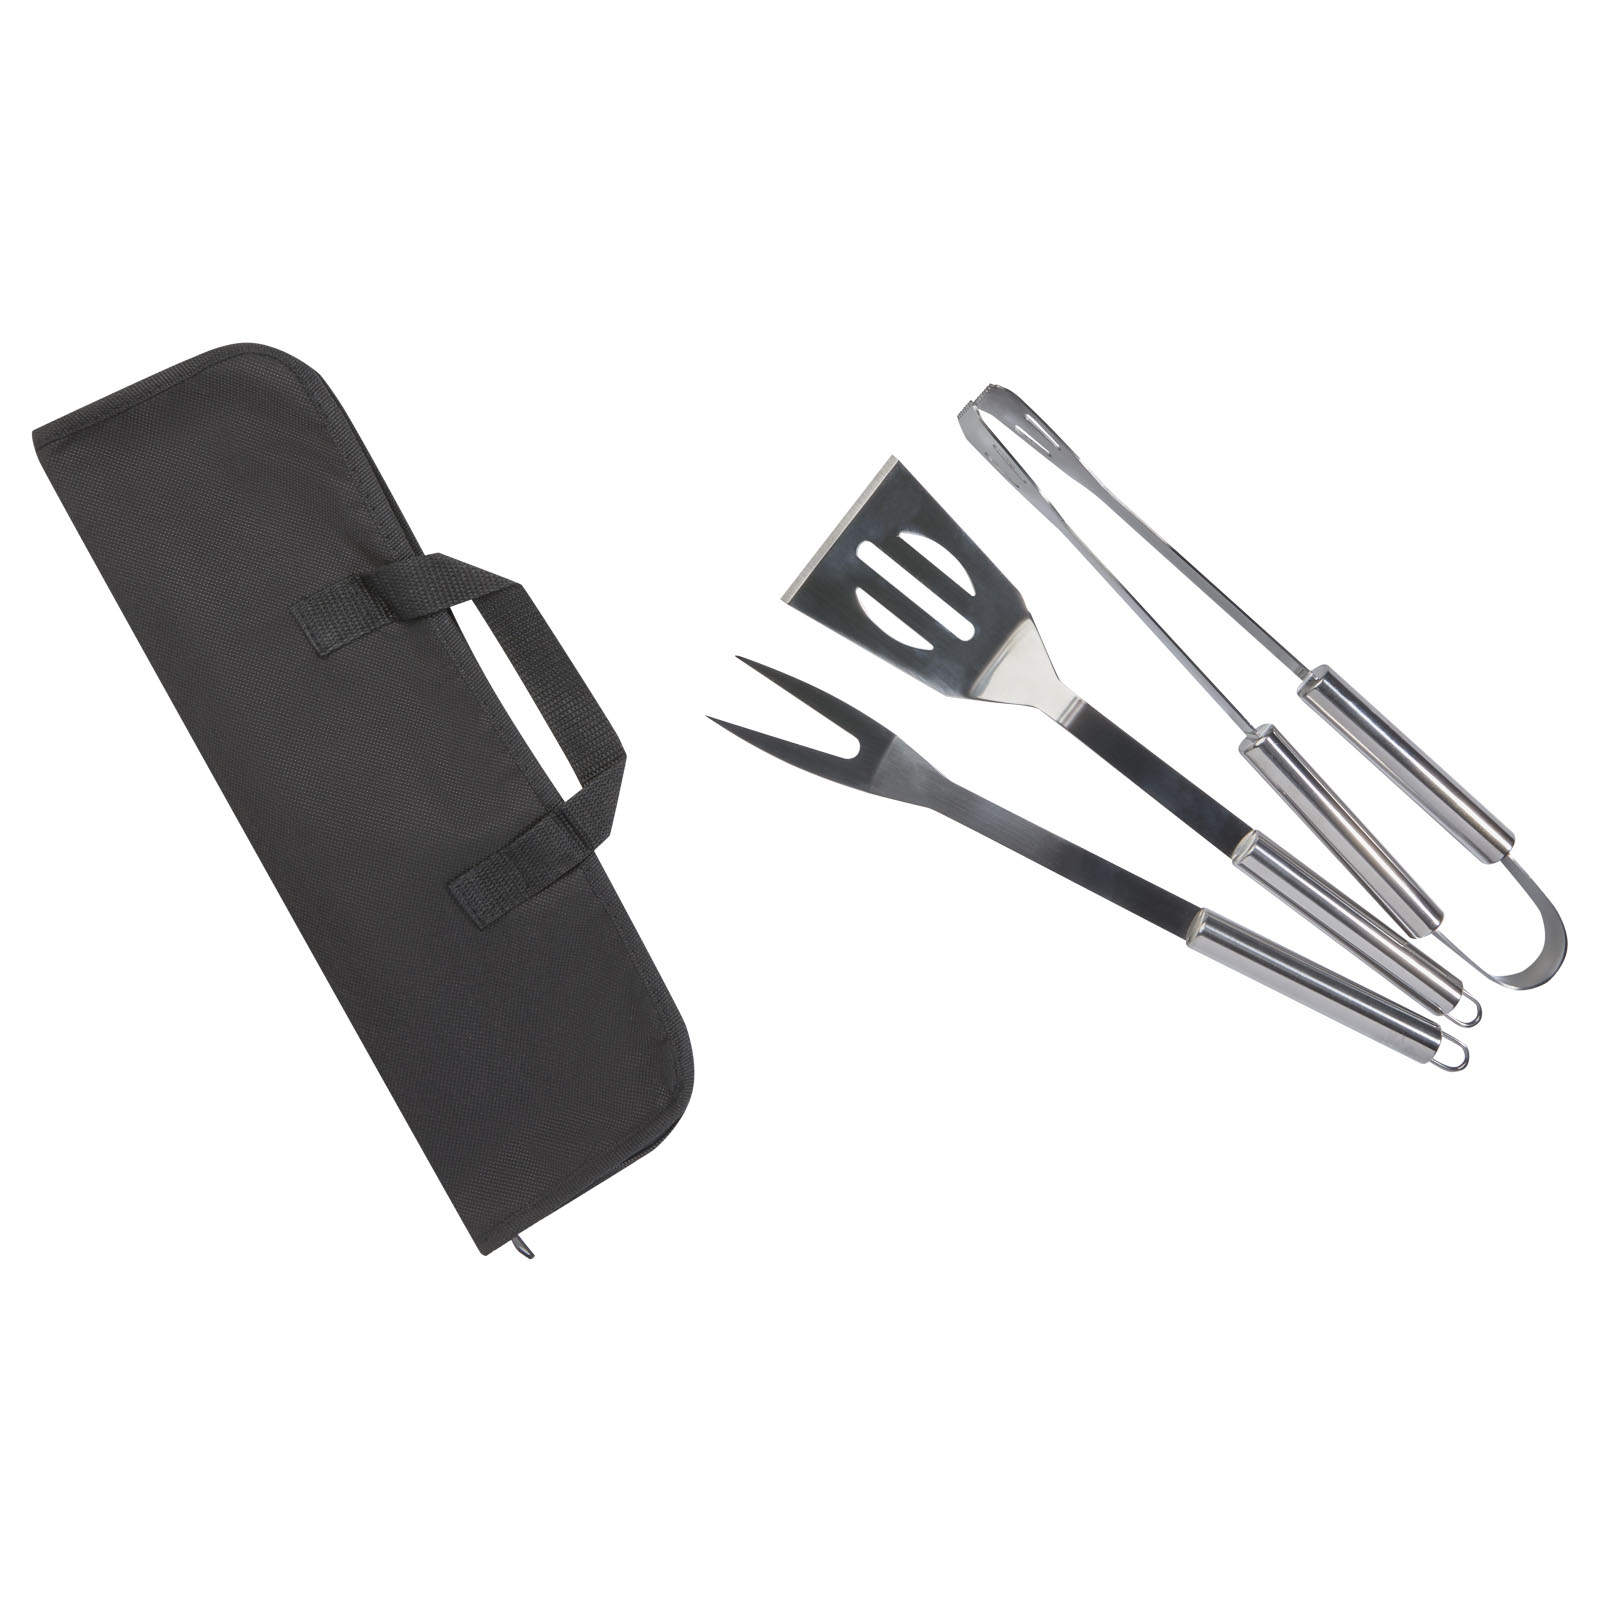 Advertising BBQ Accessories - Barcabo BBQ 3-piece set - 3